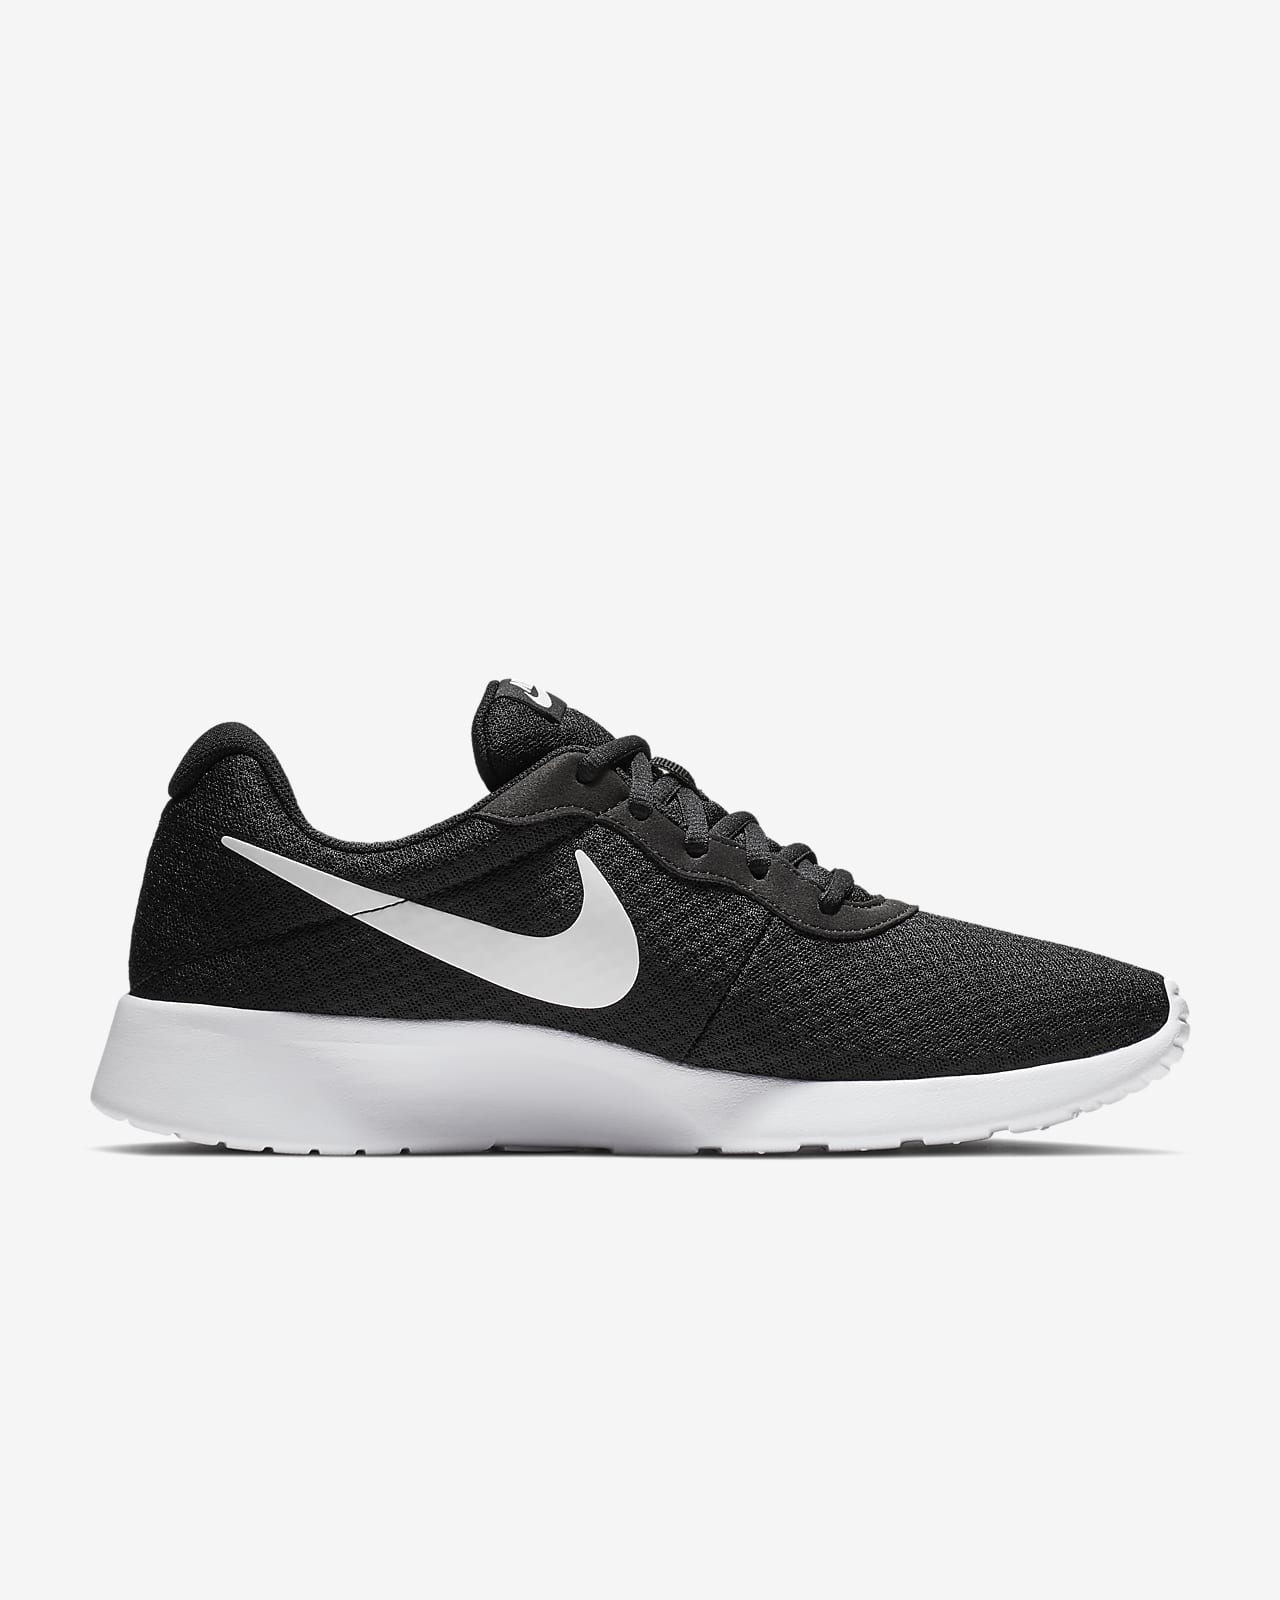 grey white and black nike shoes